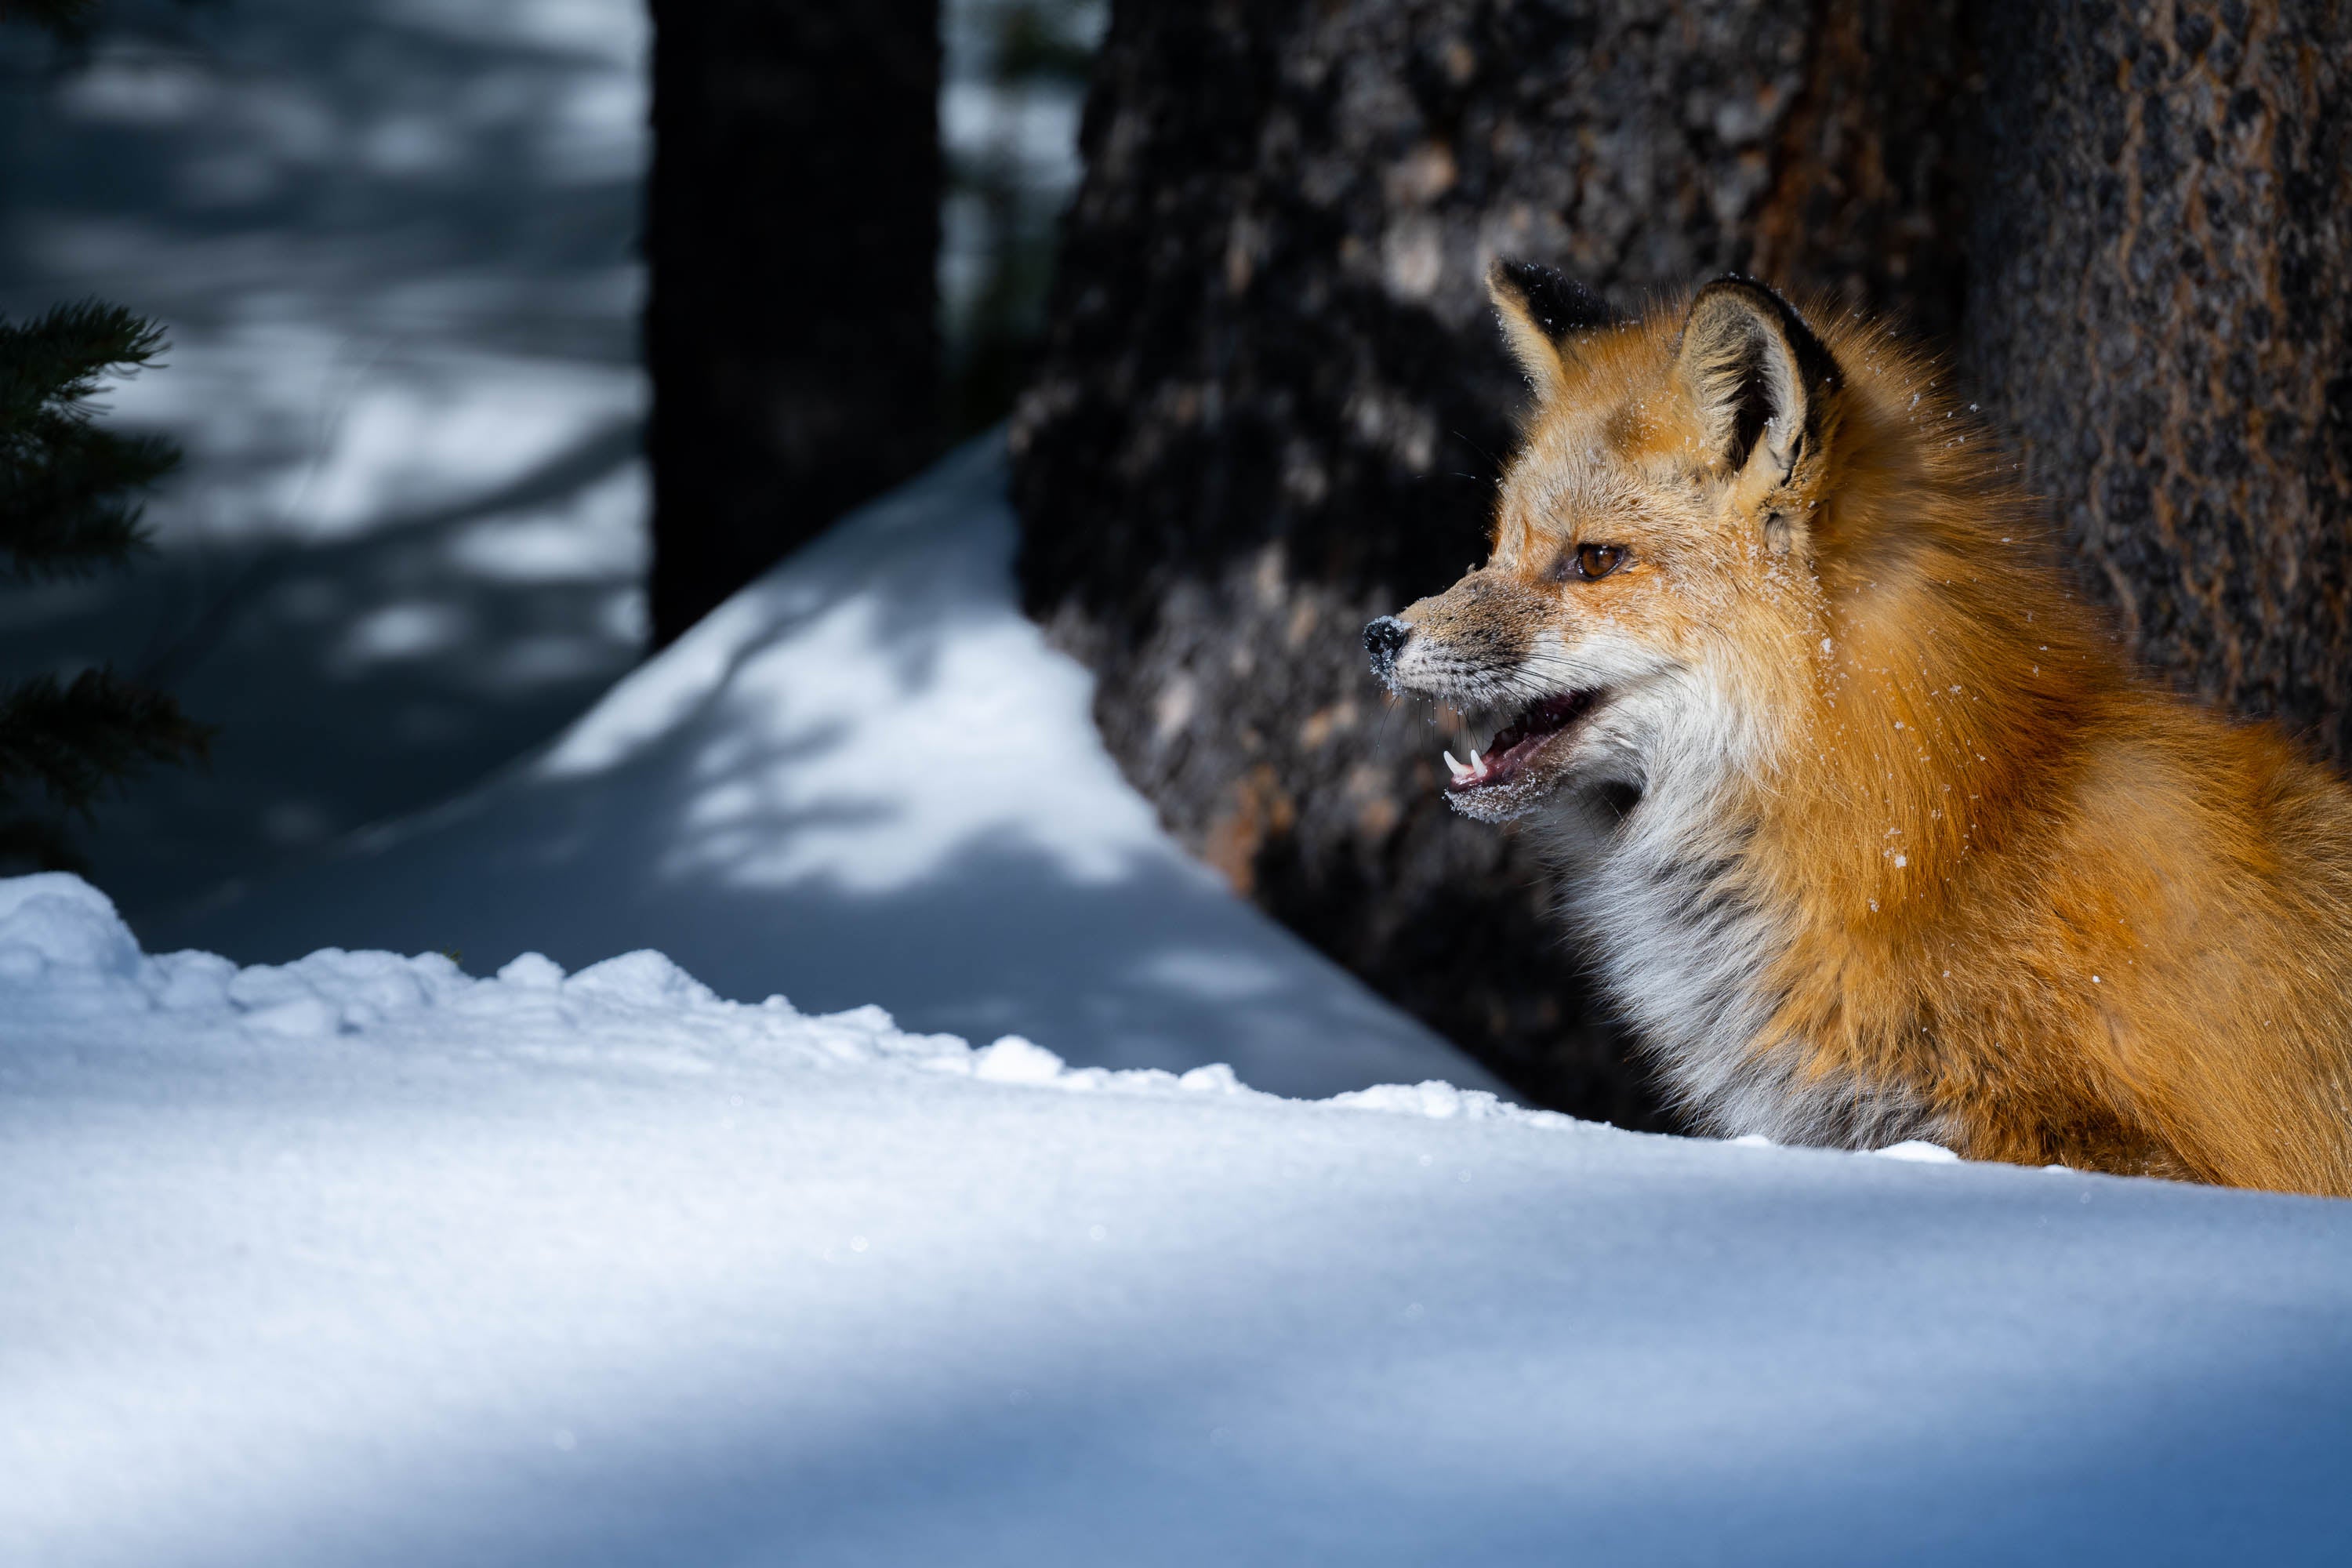 The Fox on The Watch, Yellowstone NP